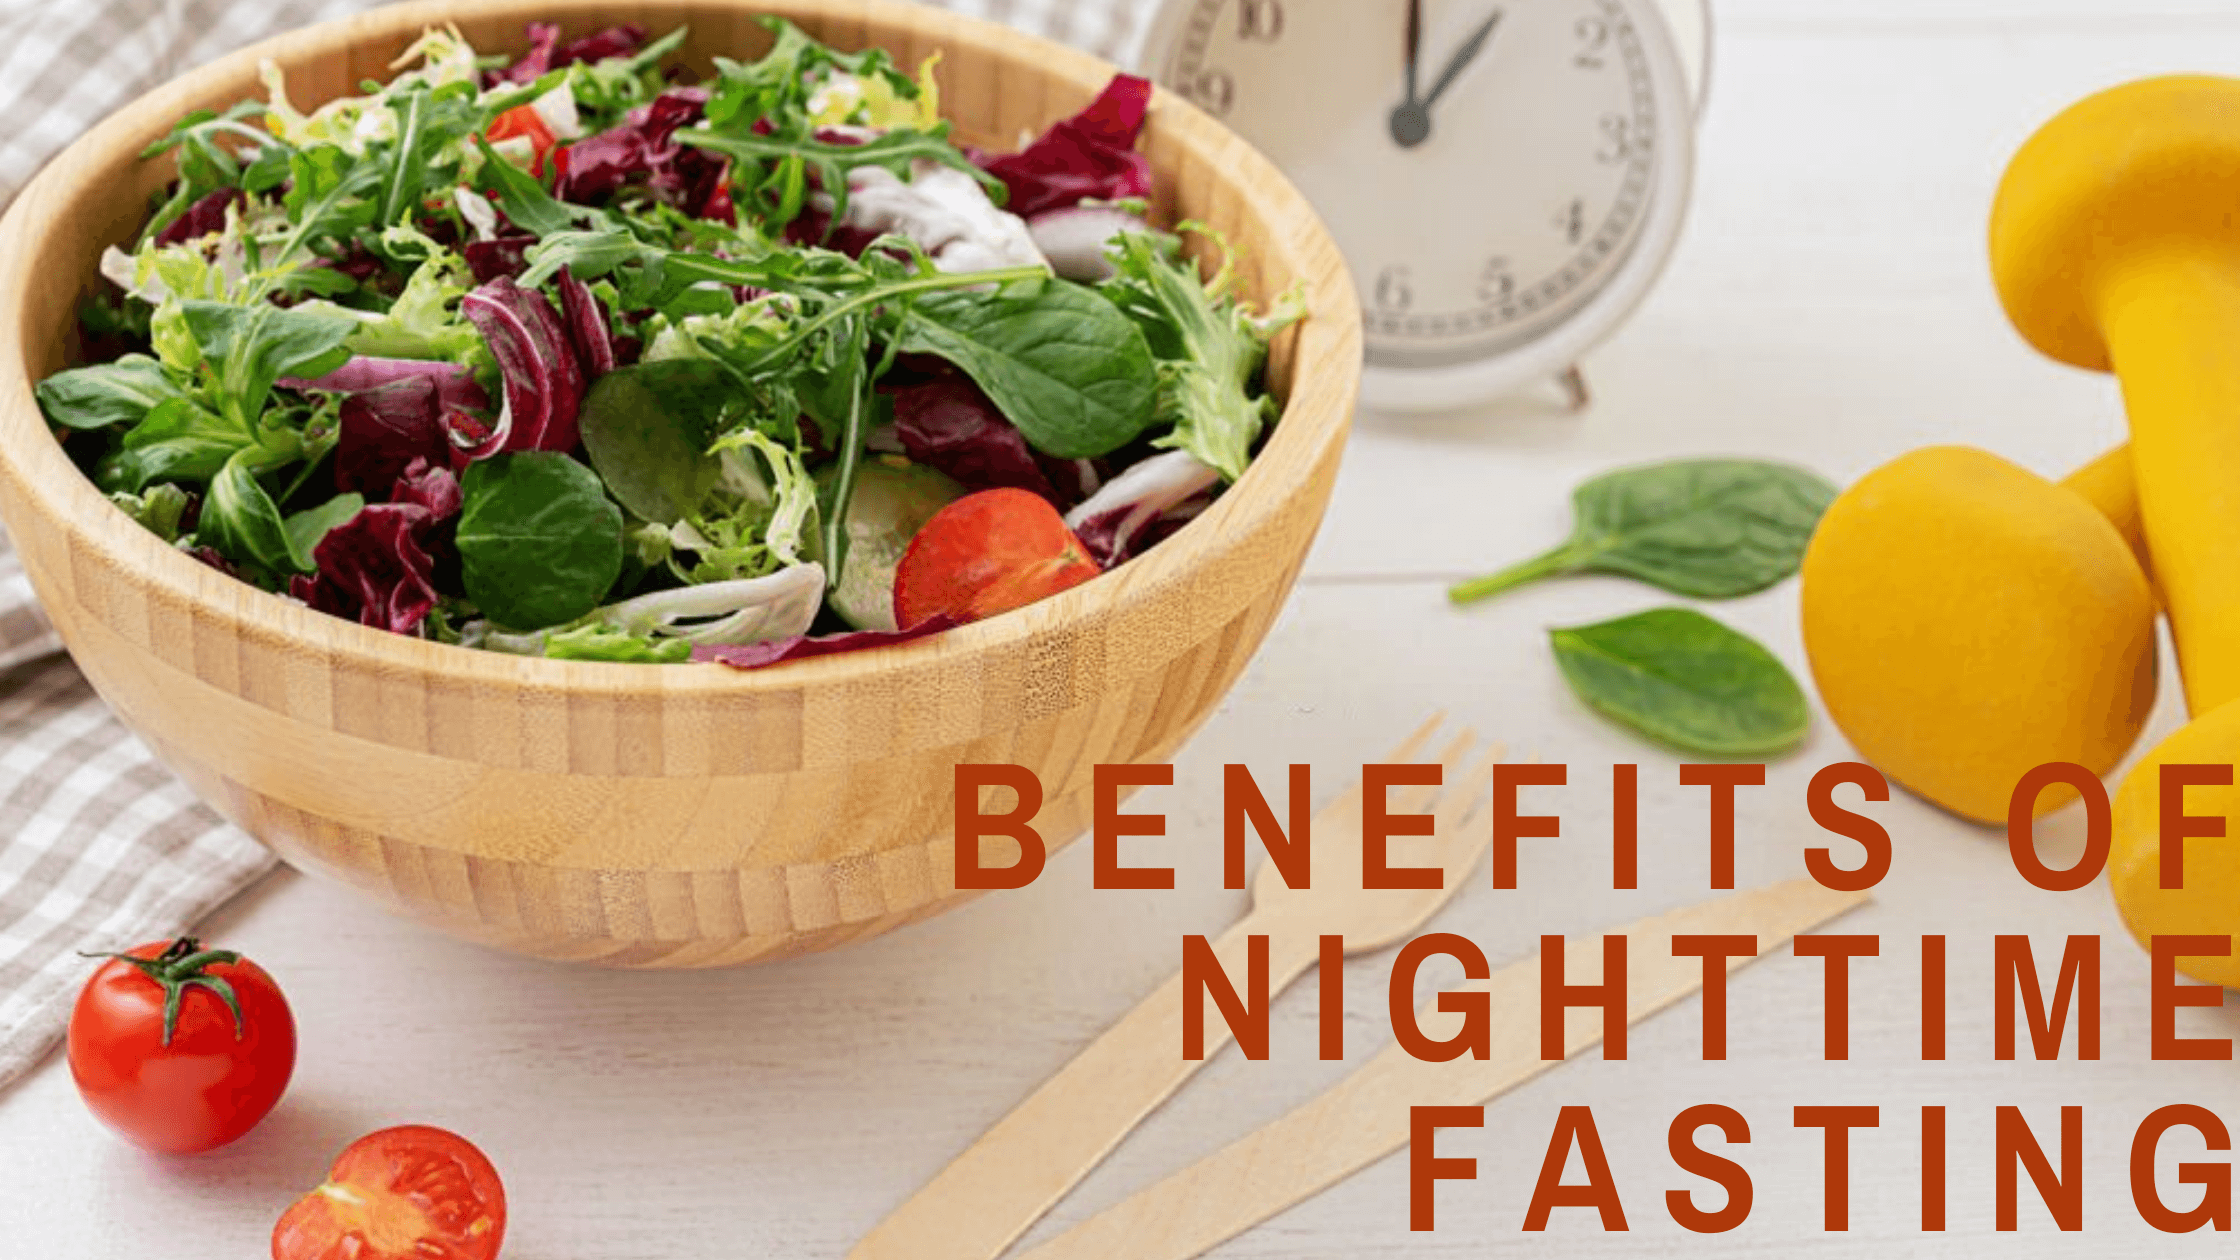 Nighttime-Fasting-Can-Benefit-Your-Health